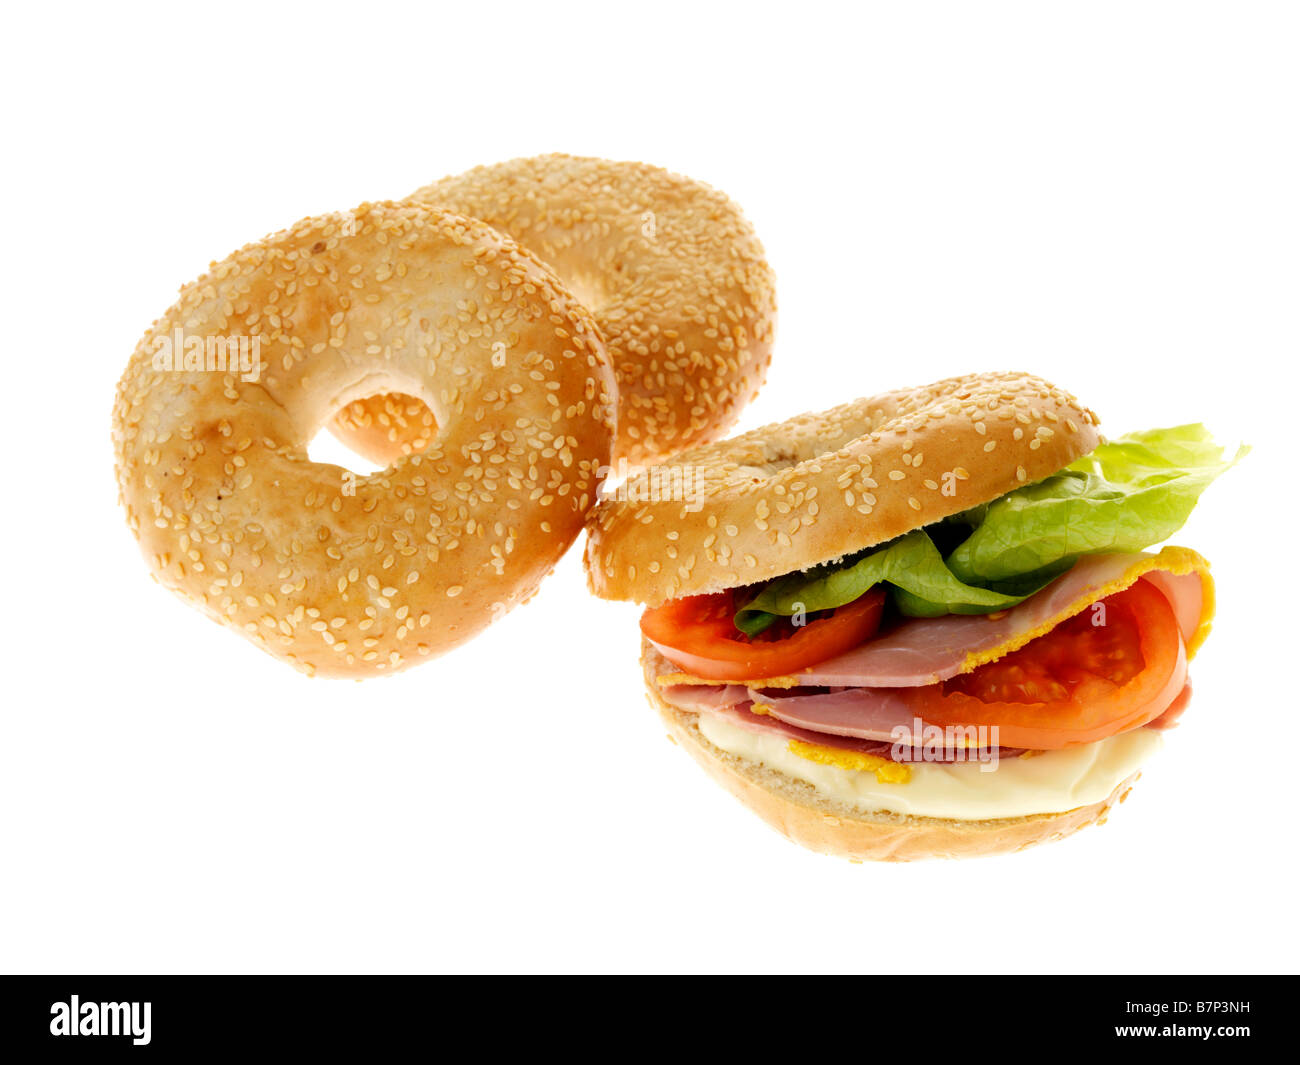 Fresh Cold Cooked Ham And Salad Sandwich Isolated Against A White Backgound With No People And A Clipping Path Stock Photo